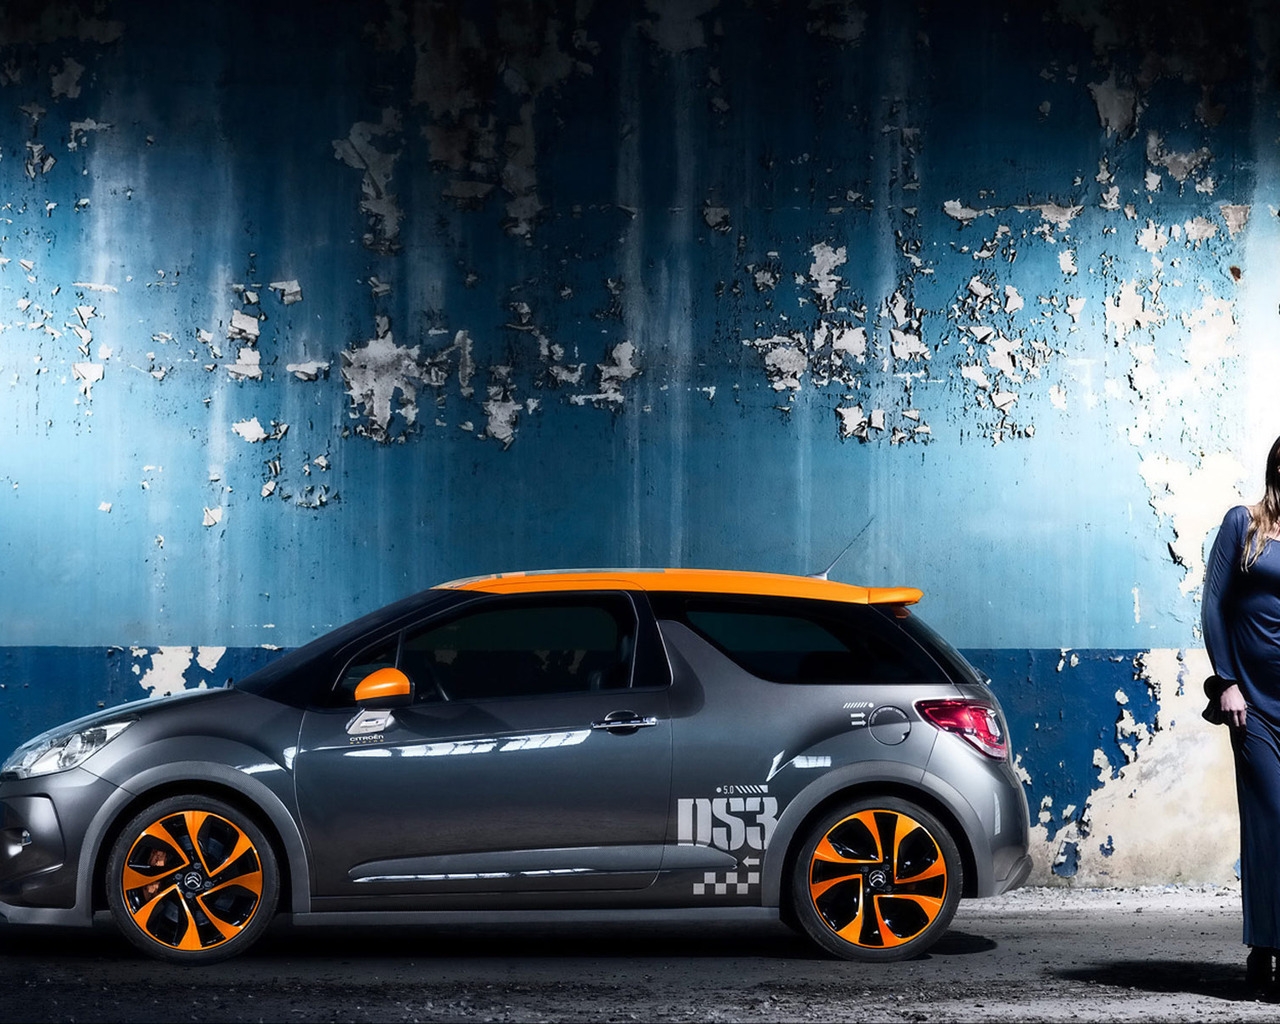 Cool Citroen DS3 Side Angle for 1280 x 1024 resolution